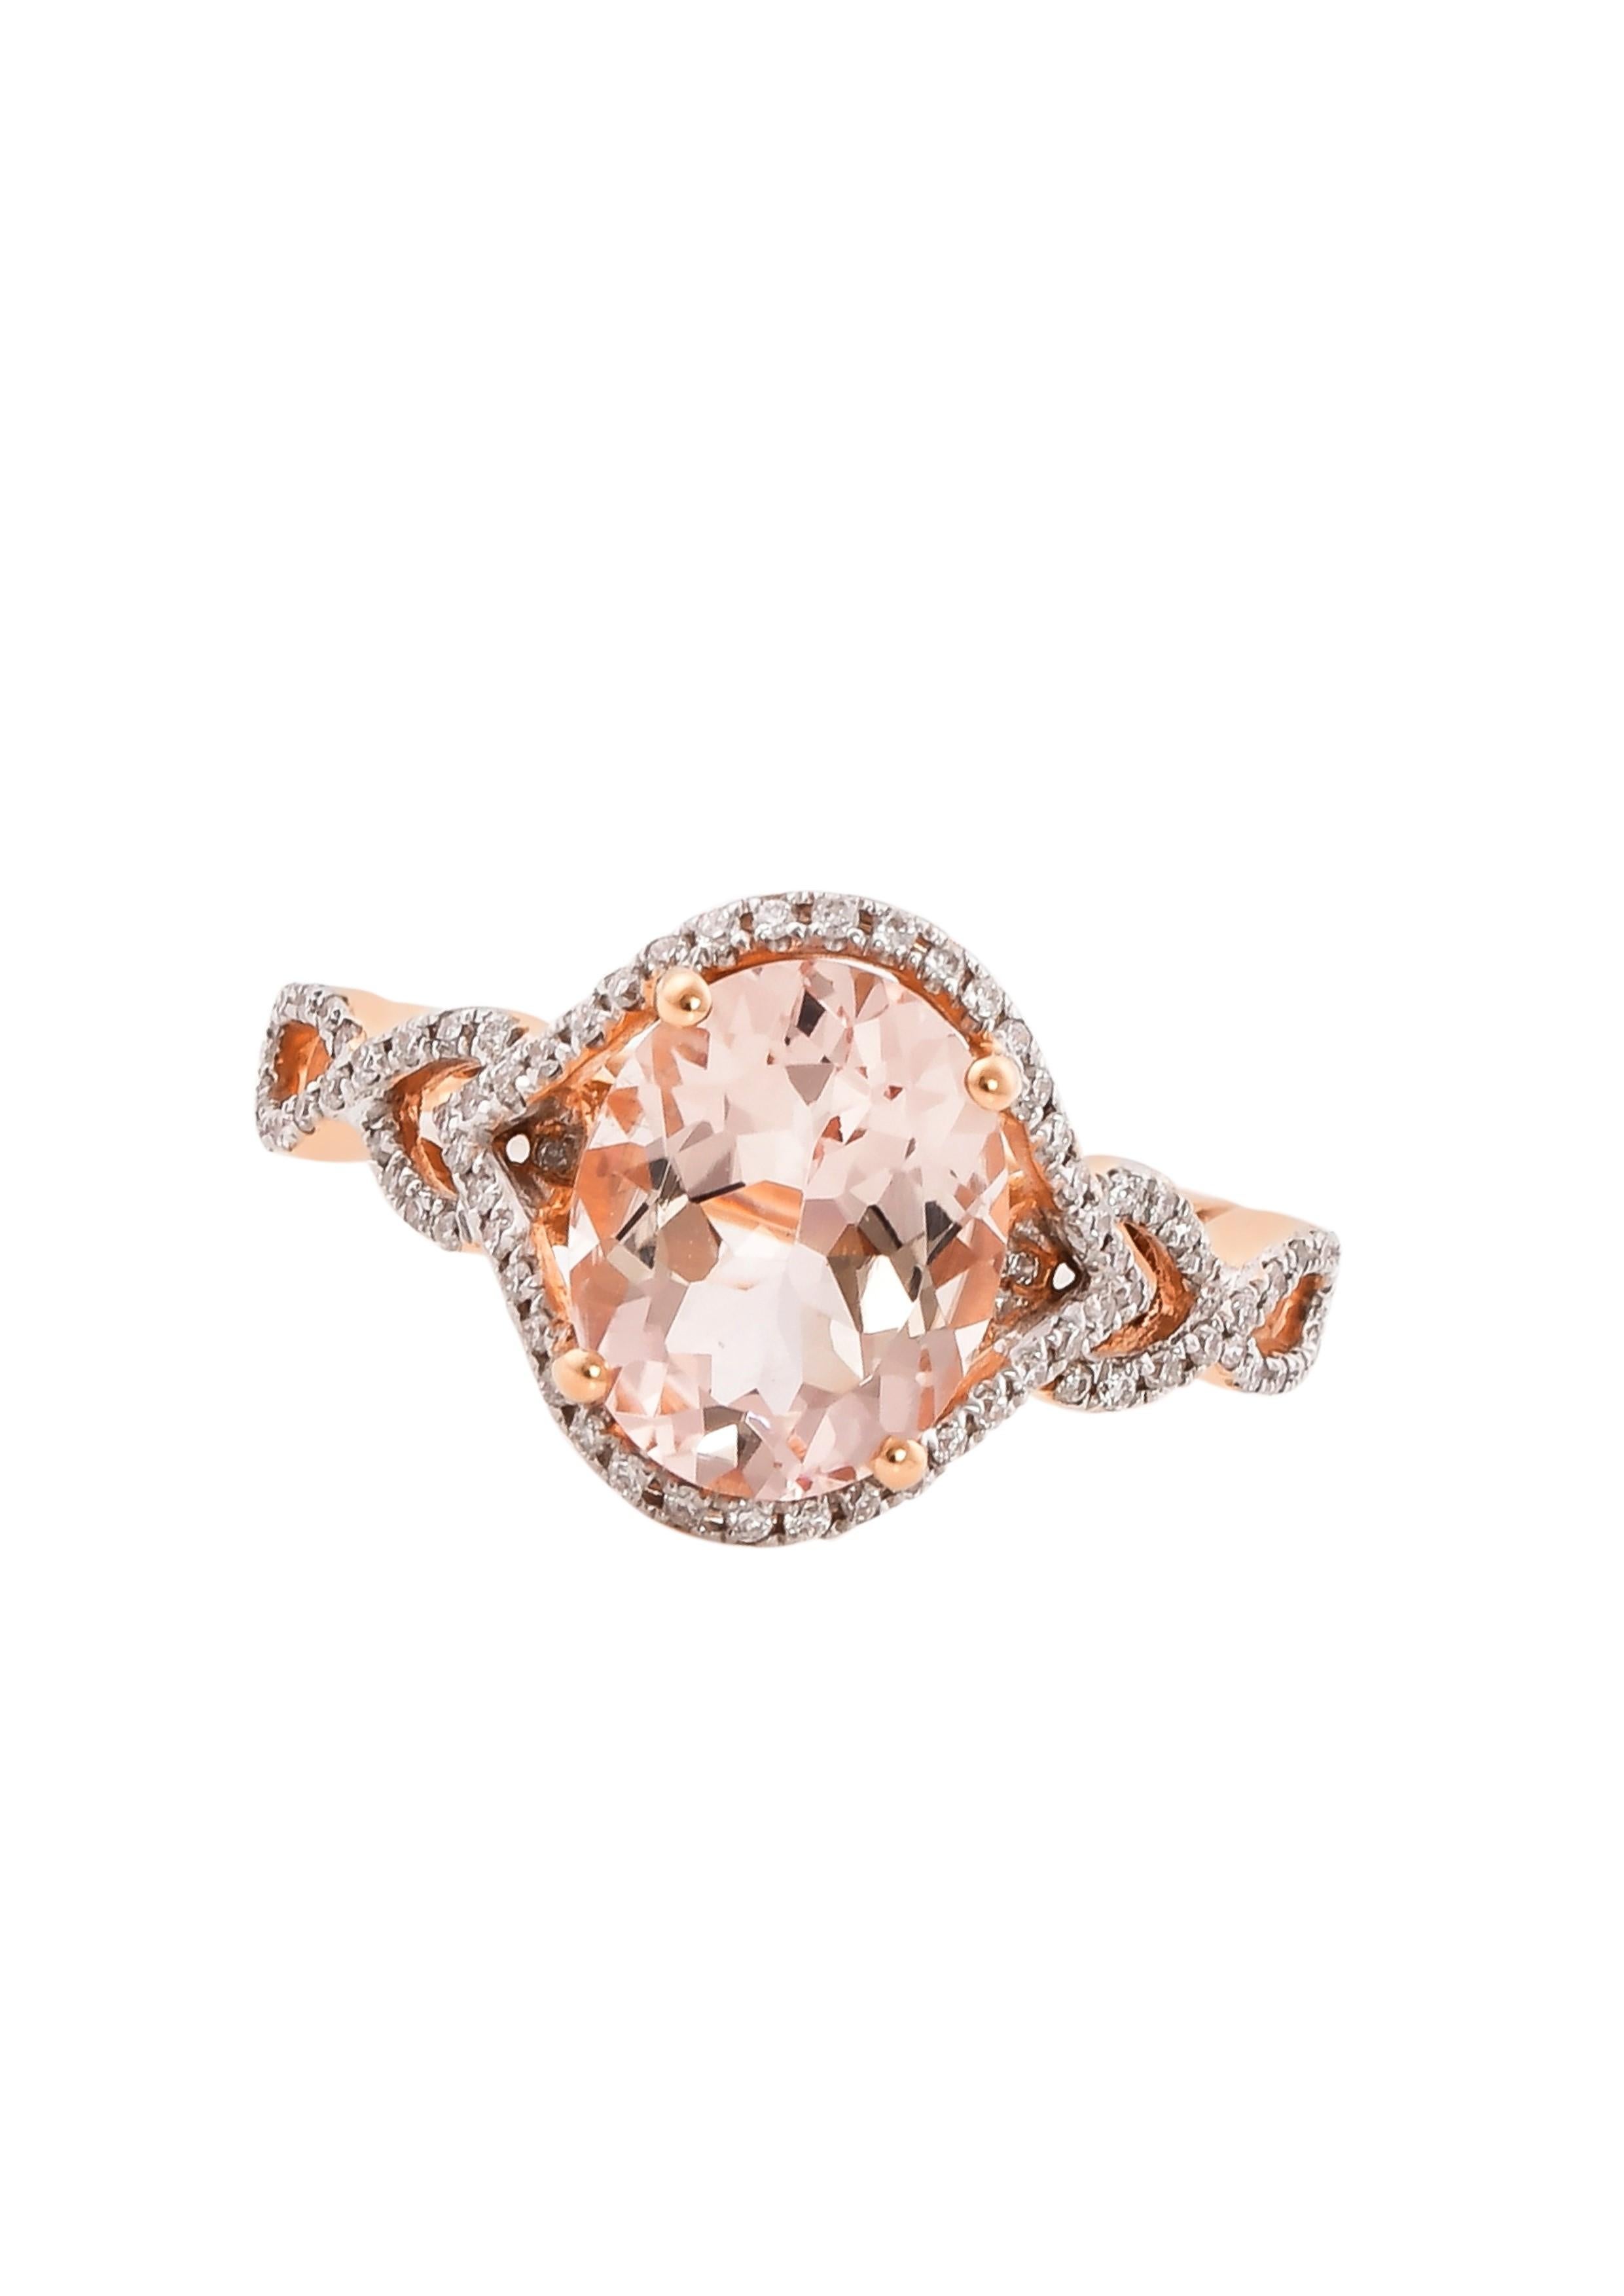 Oval Cut 2.26 Carat Morganite and Diamond Ring in 18 Karat Rose Gold For Sale